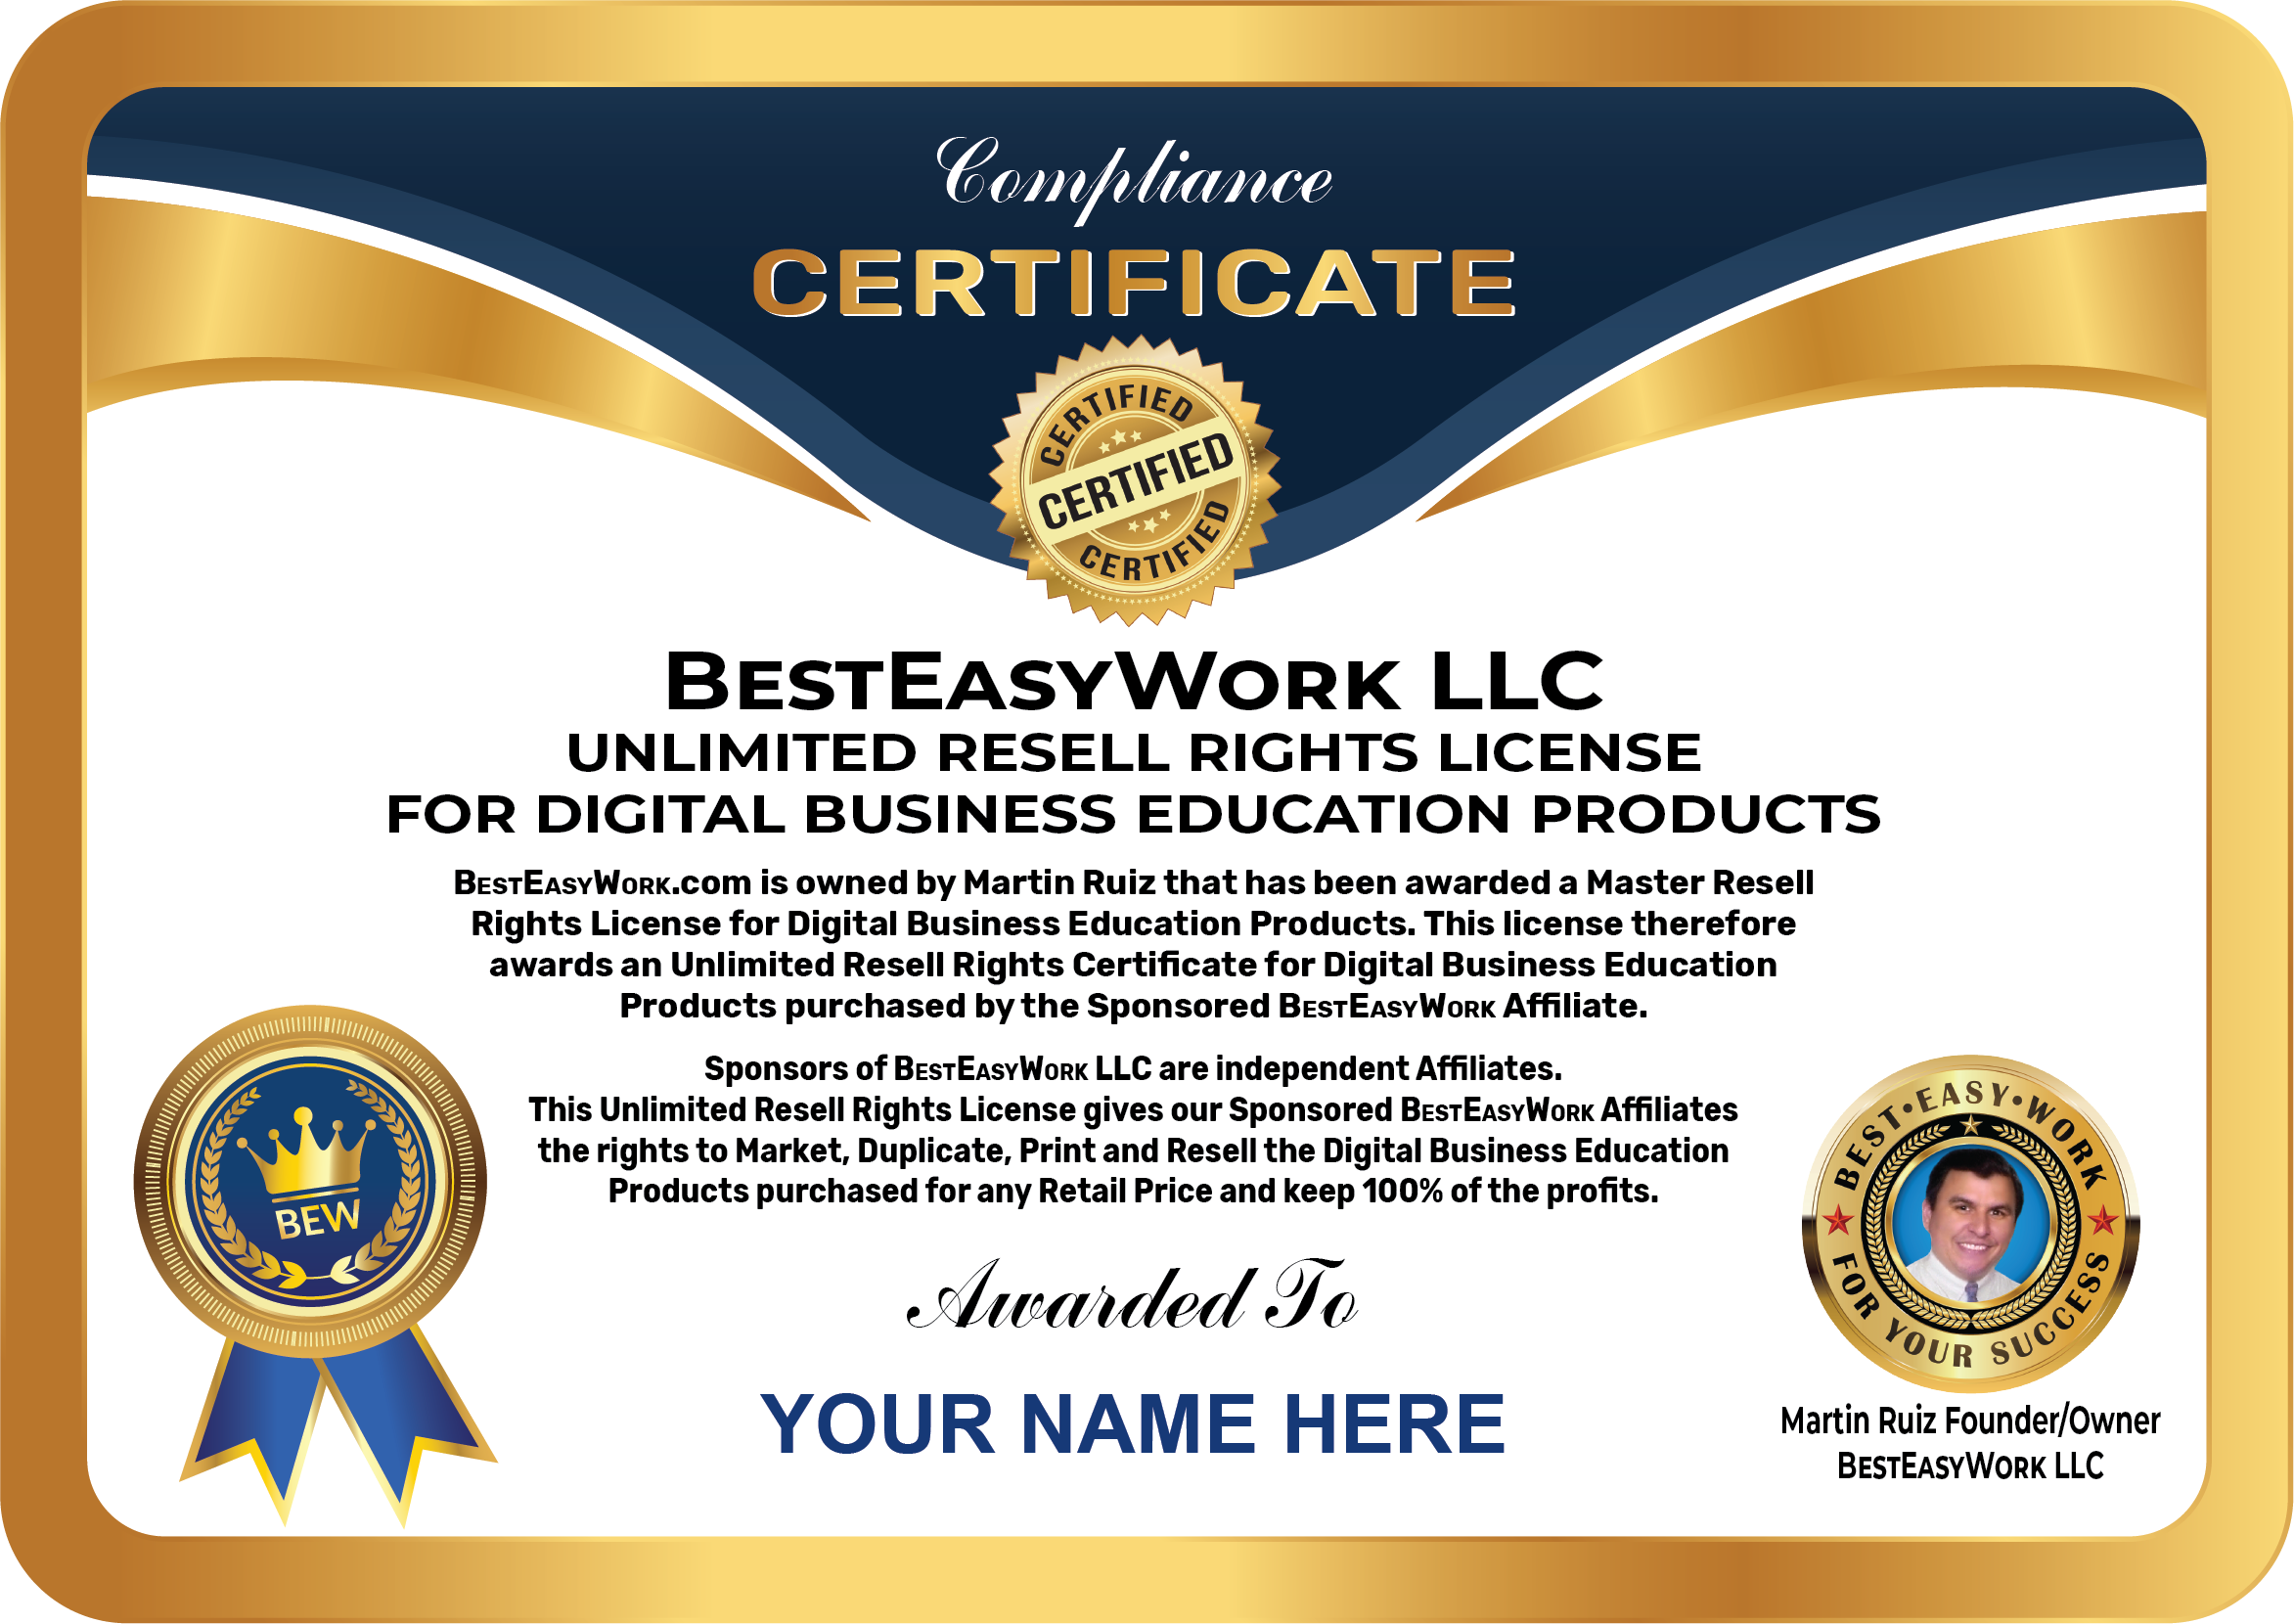 http://www.besteasywork.com/DigProductCert.PNG